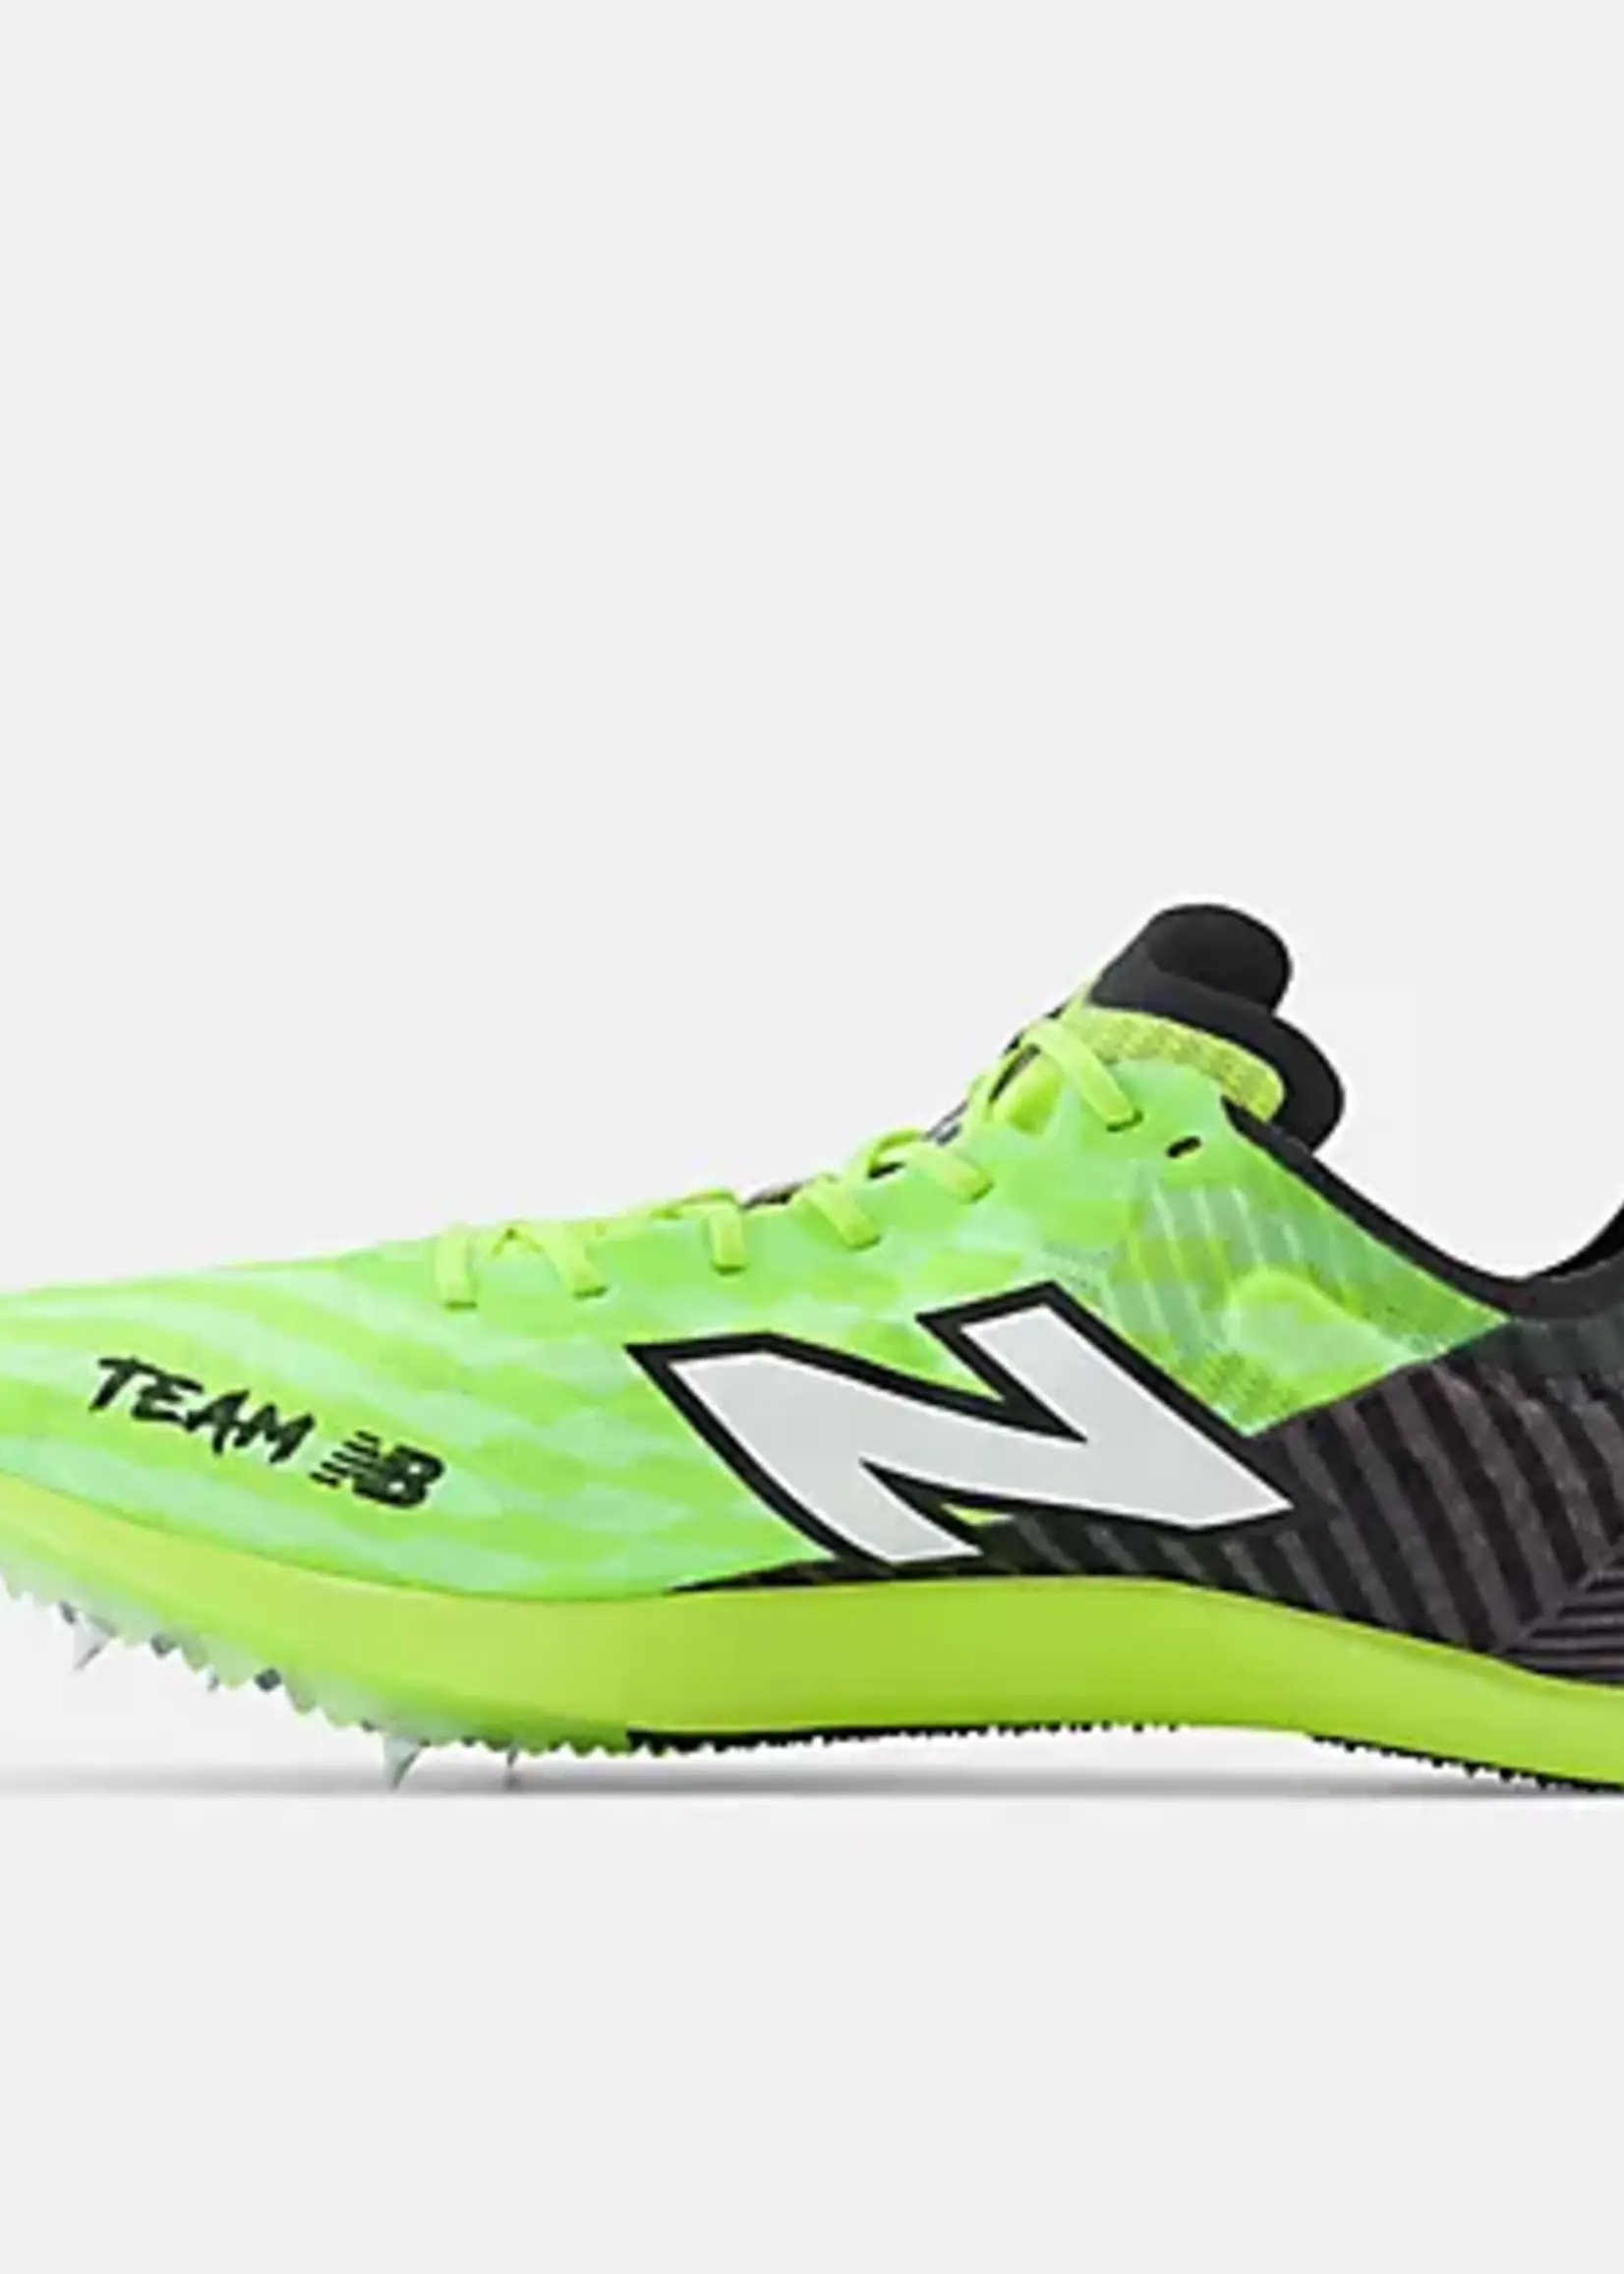 NEW BALANCE MEN'S FUELCELL MD500 V9